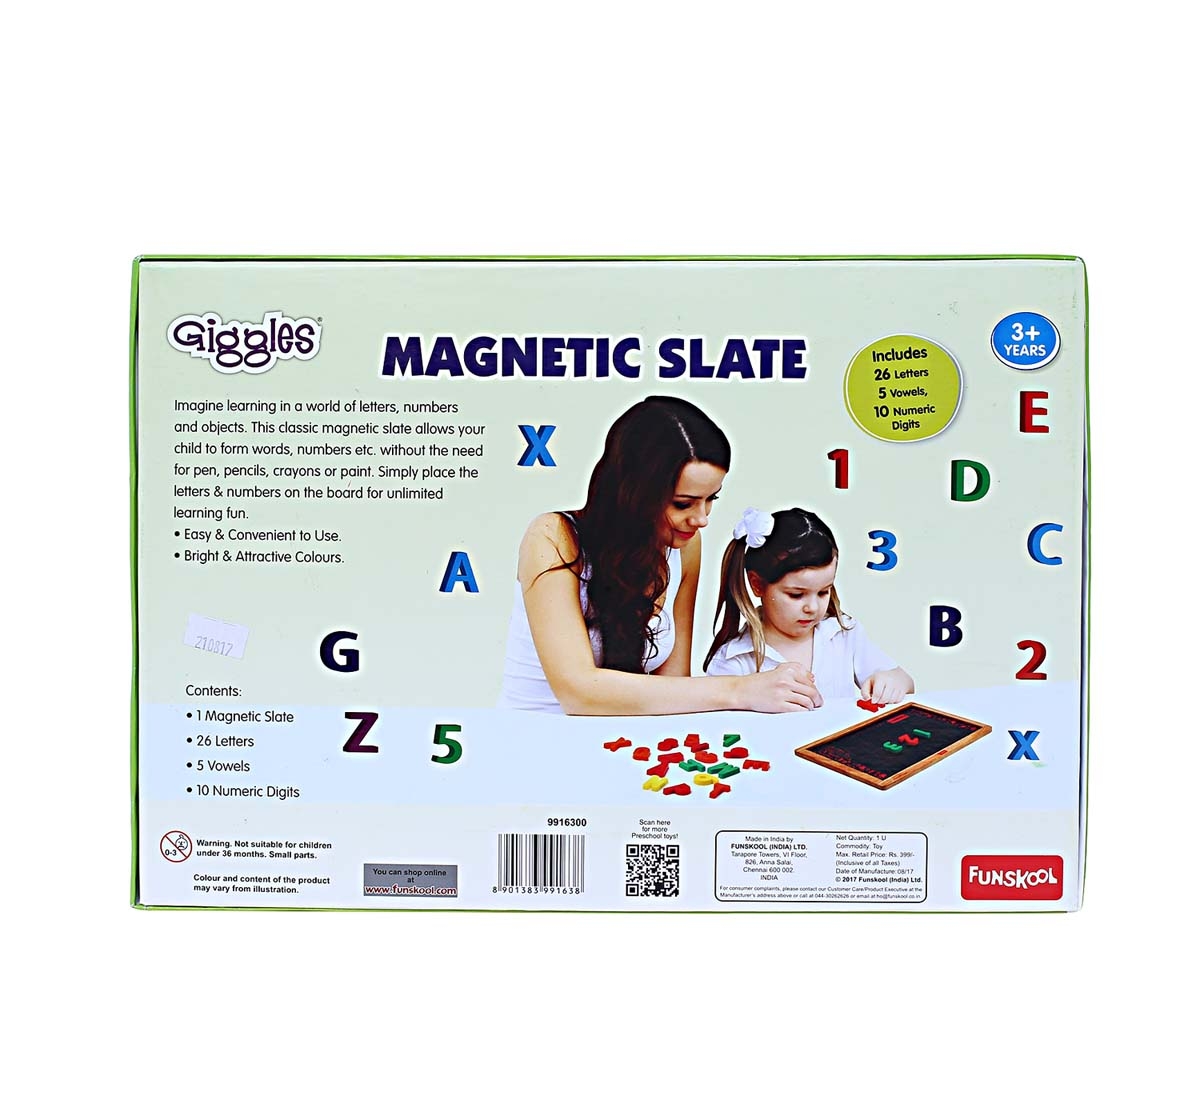 Funskool Magnetic Slate Activity Table & Boards for Kids age 3Y+ 